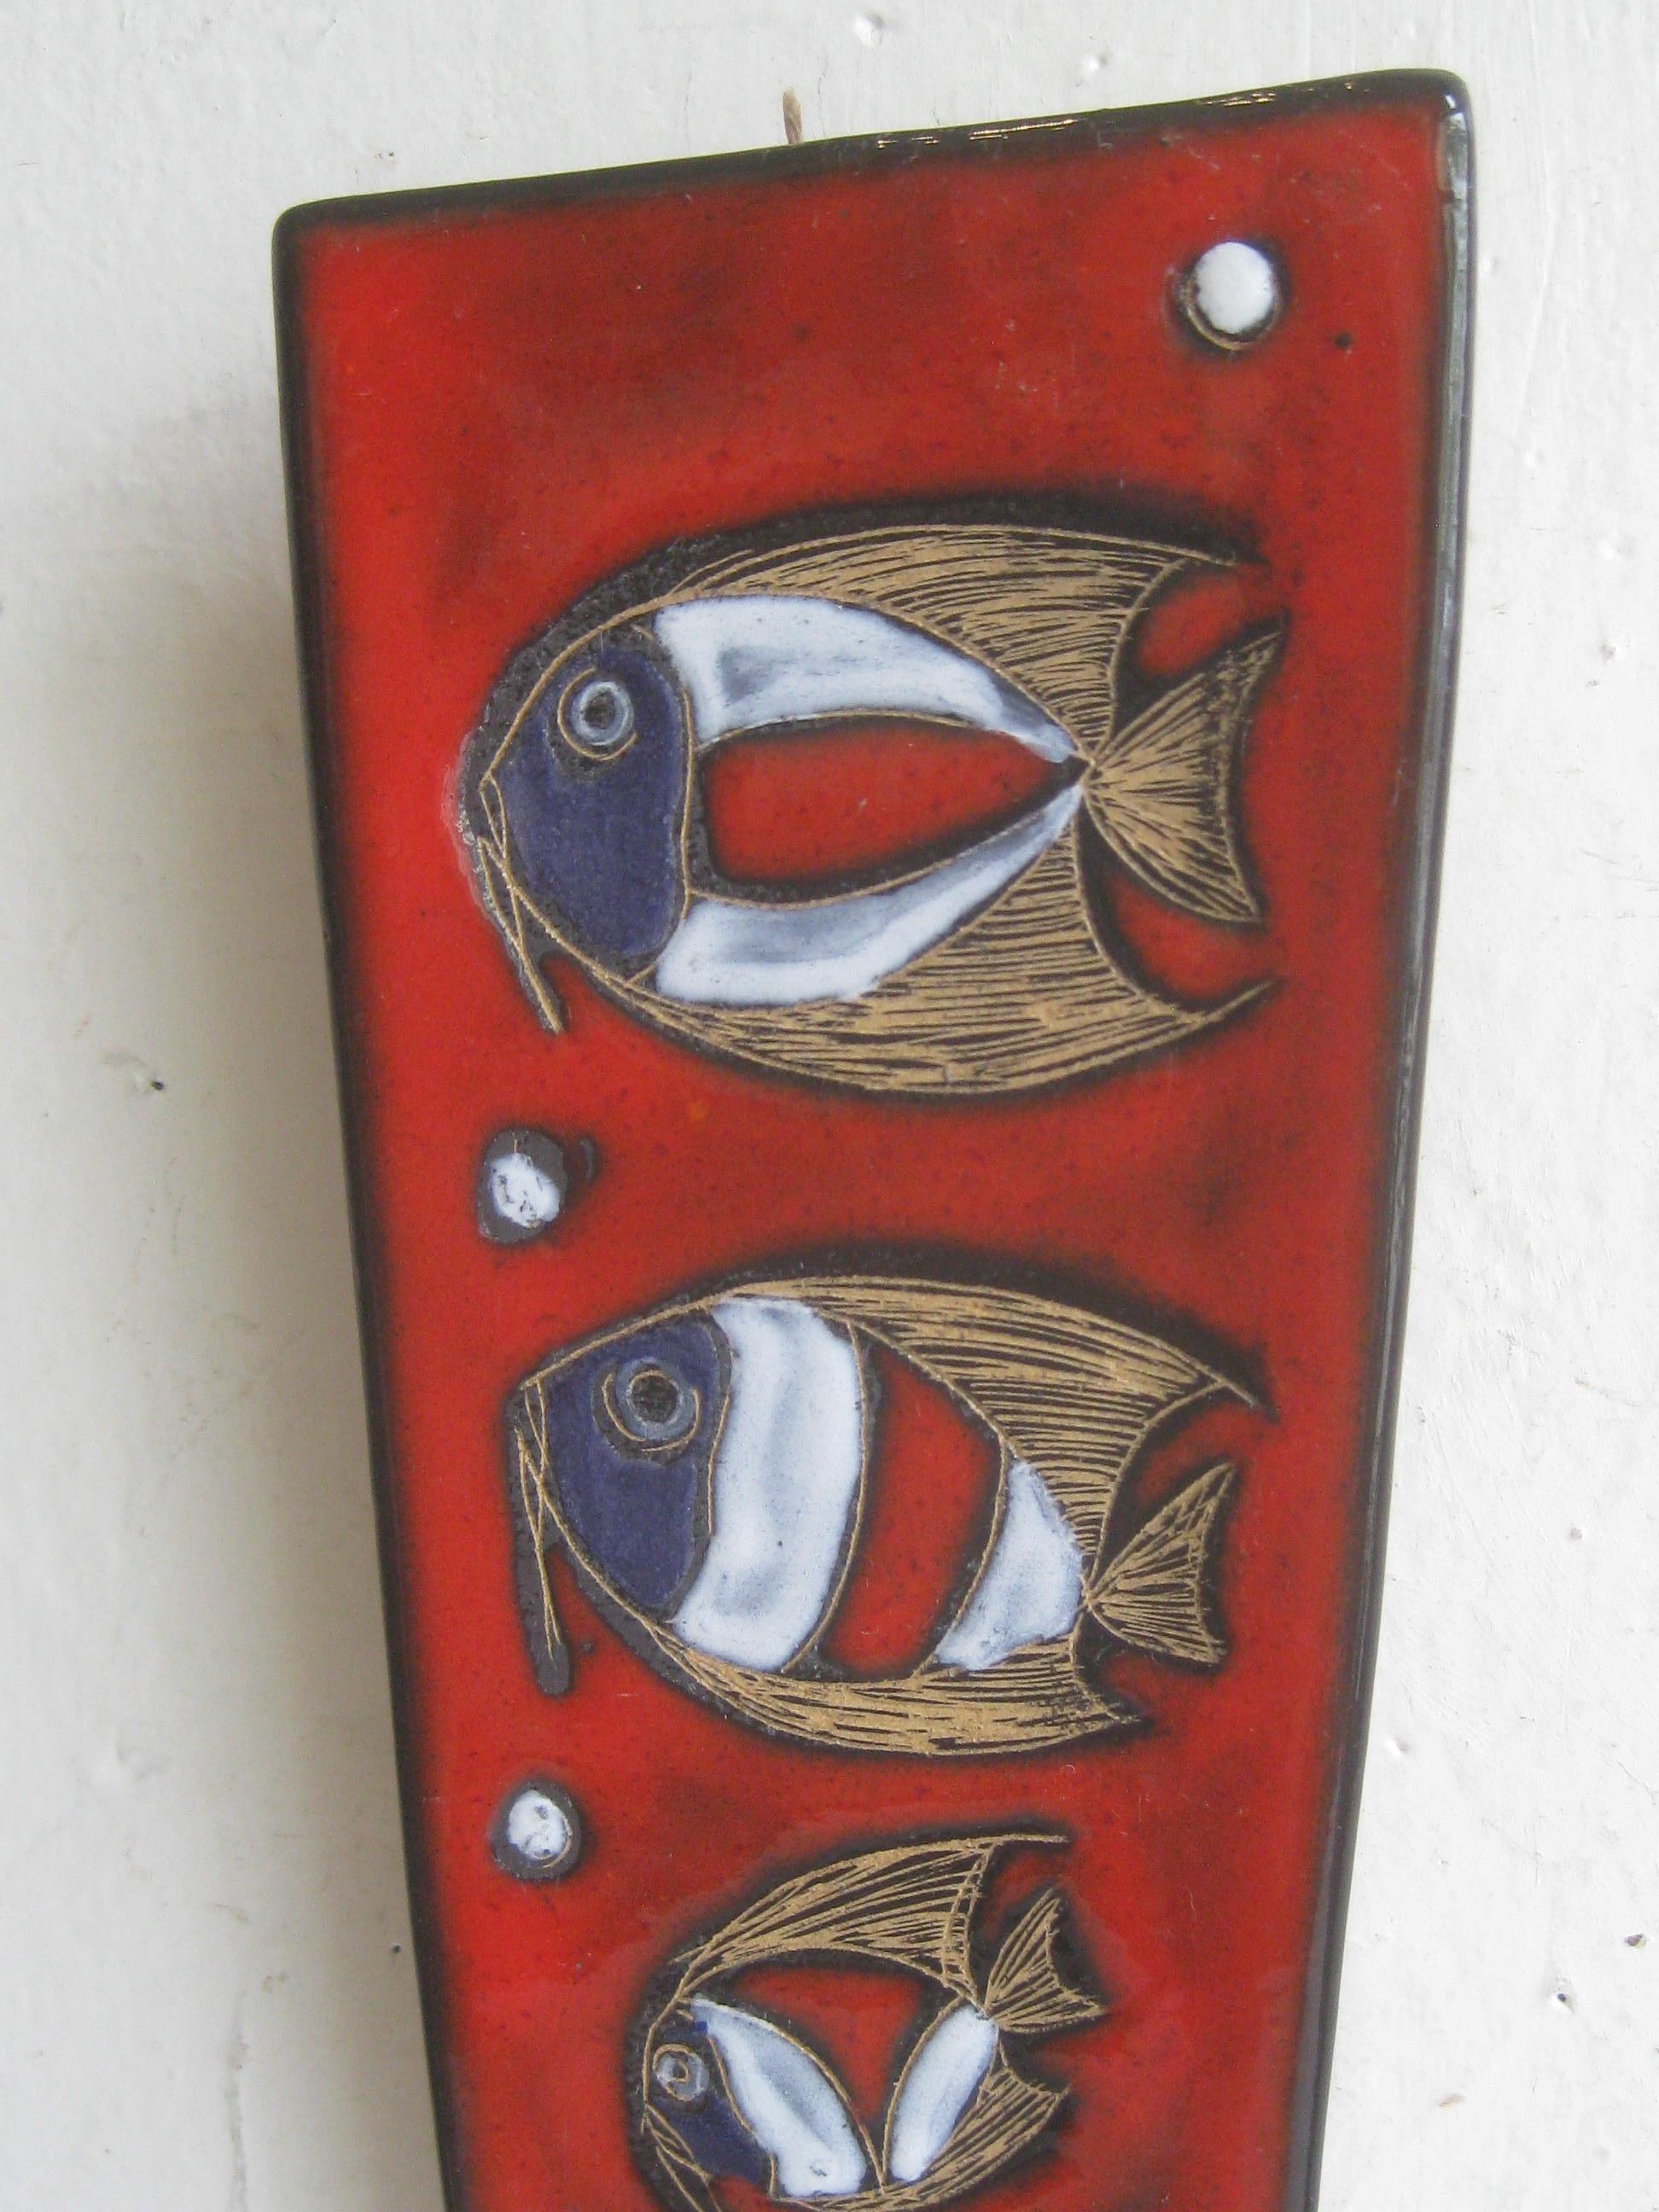 Stunning modernist Italian art pottery abstract wall plaque/sculpture by Franco Rufinelli and dates from the 1960s. Signed on the back and features 3 fish. Color and design are outstanding. In excellent shape for its age. No chips, no cracks and no